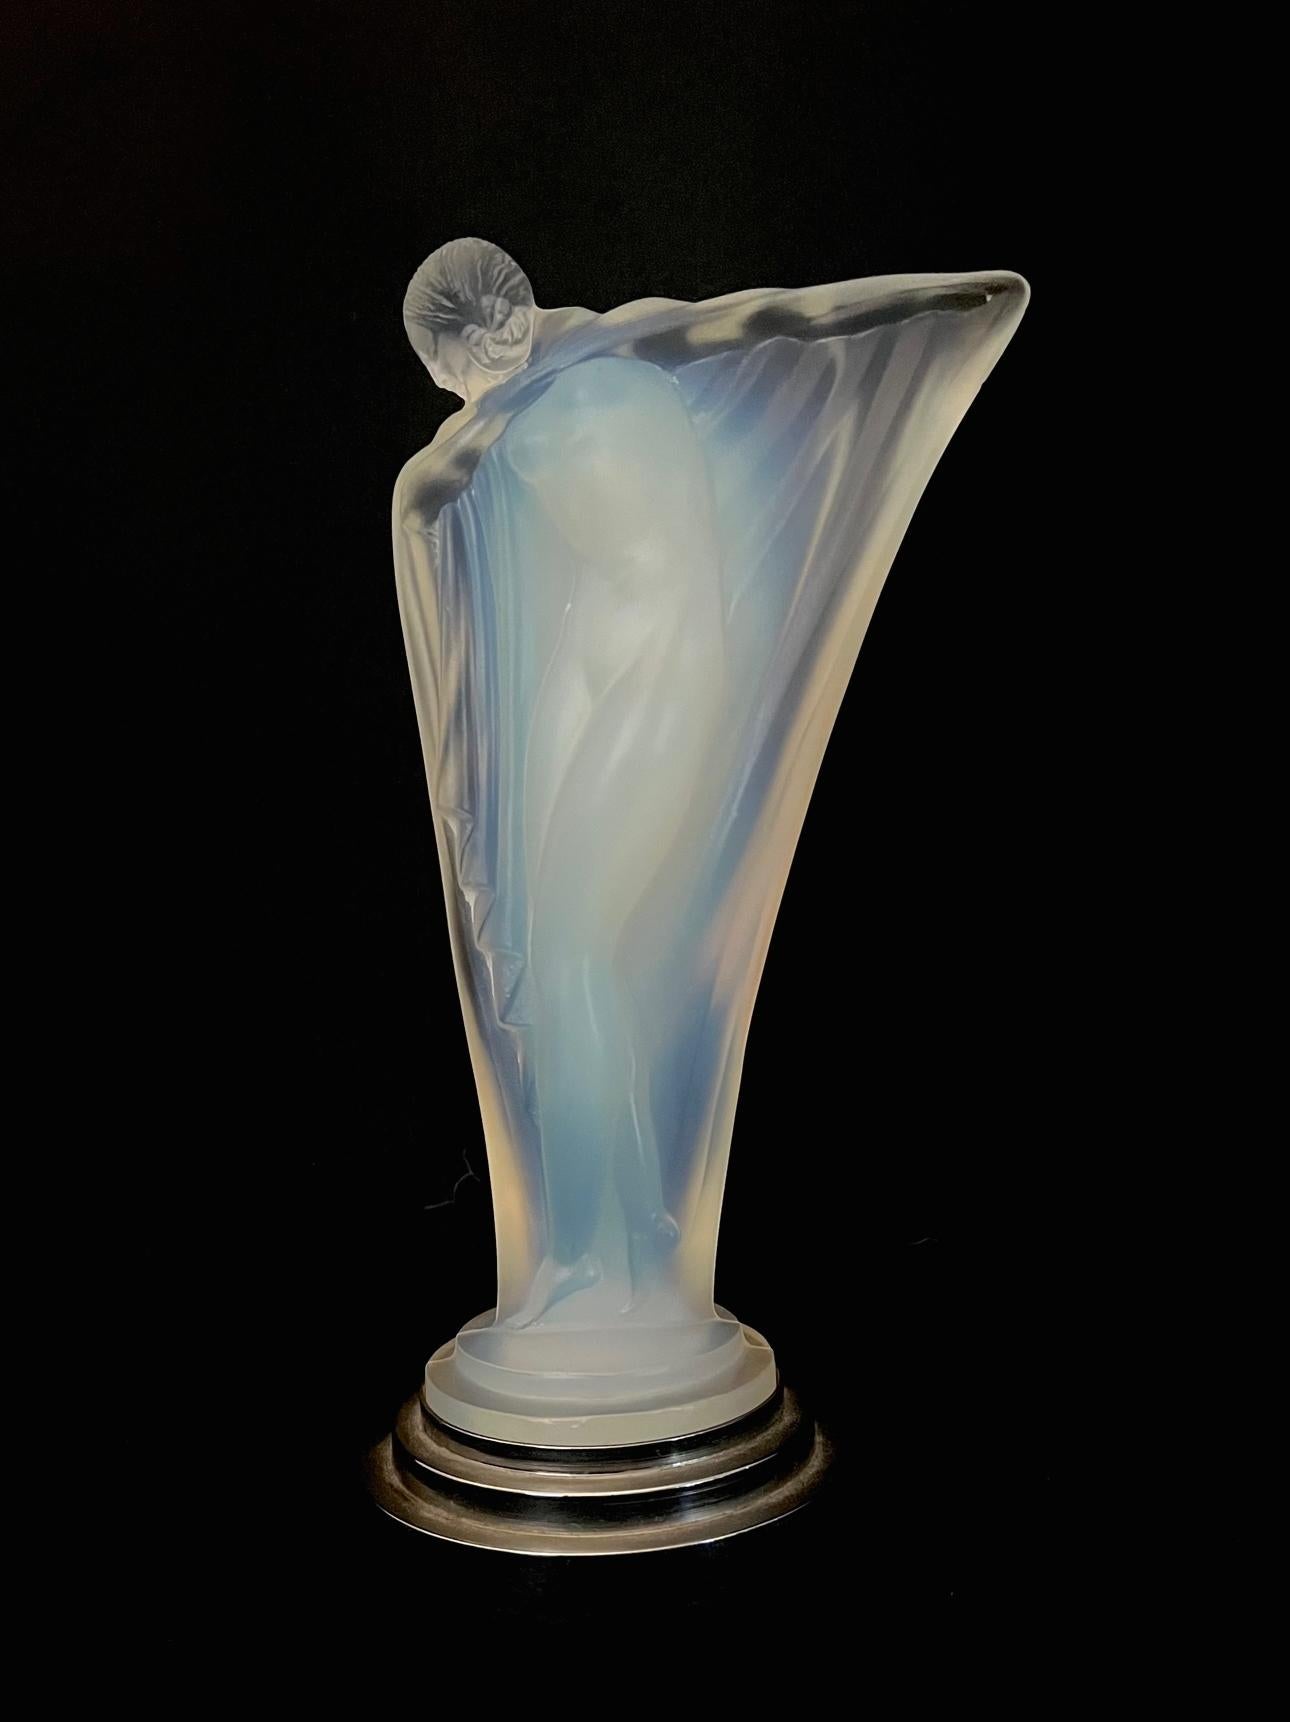 An Art Déco opalescent glass statuette of a draped nude with her arm outstretched. Mounted on a stepped nickeled base. Signed 